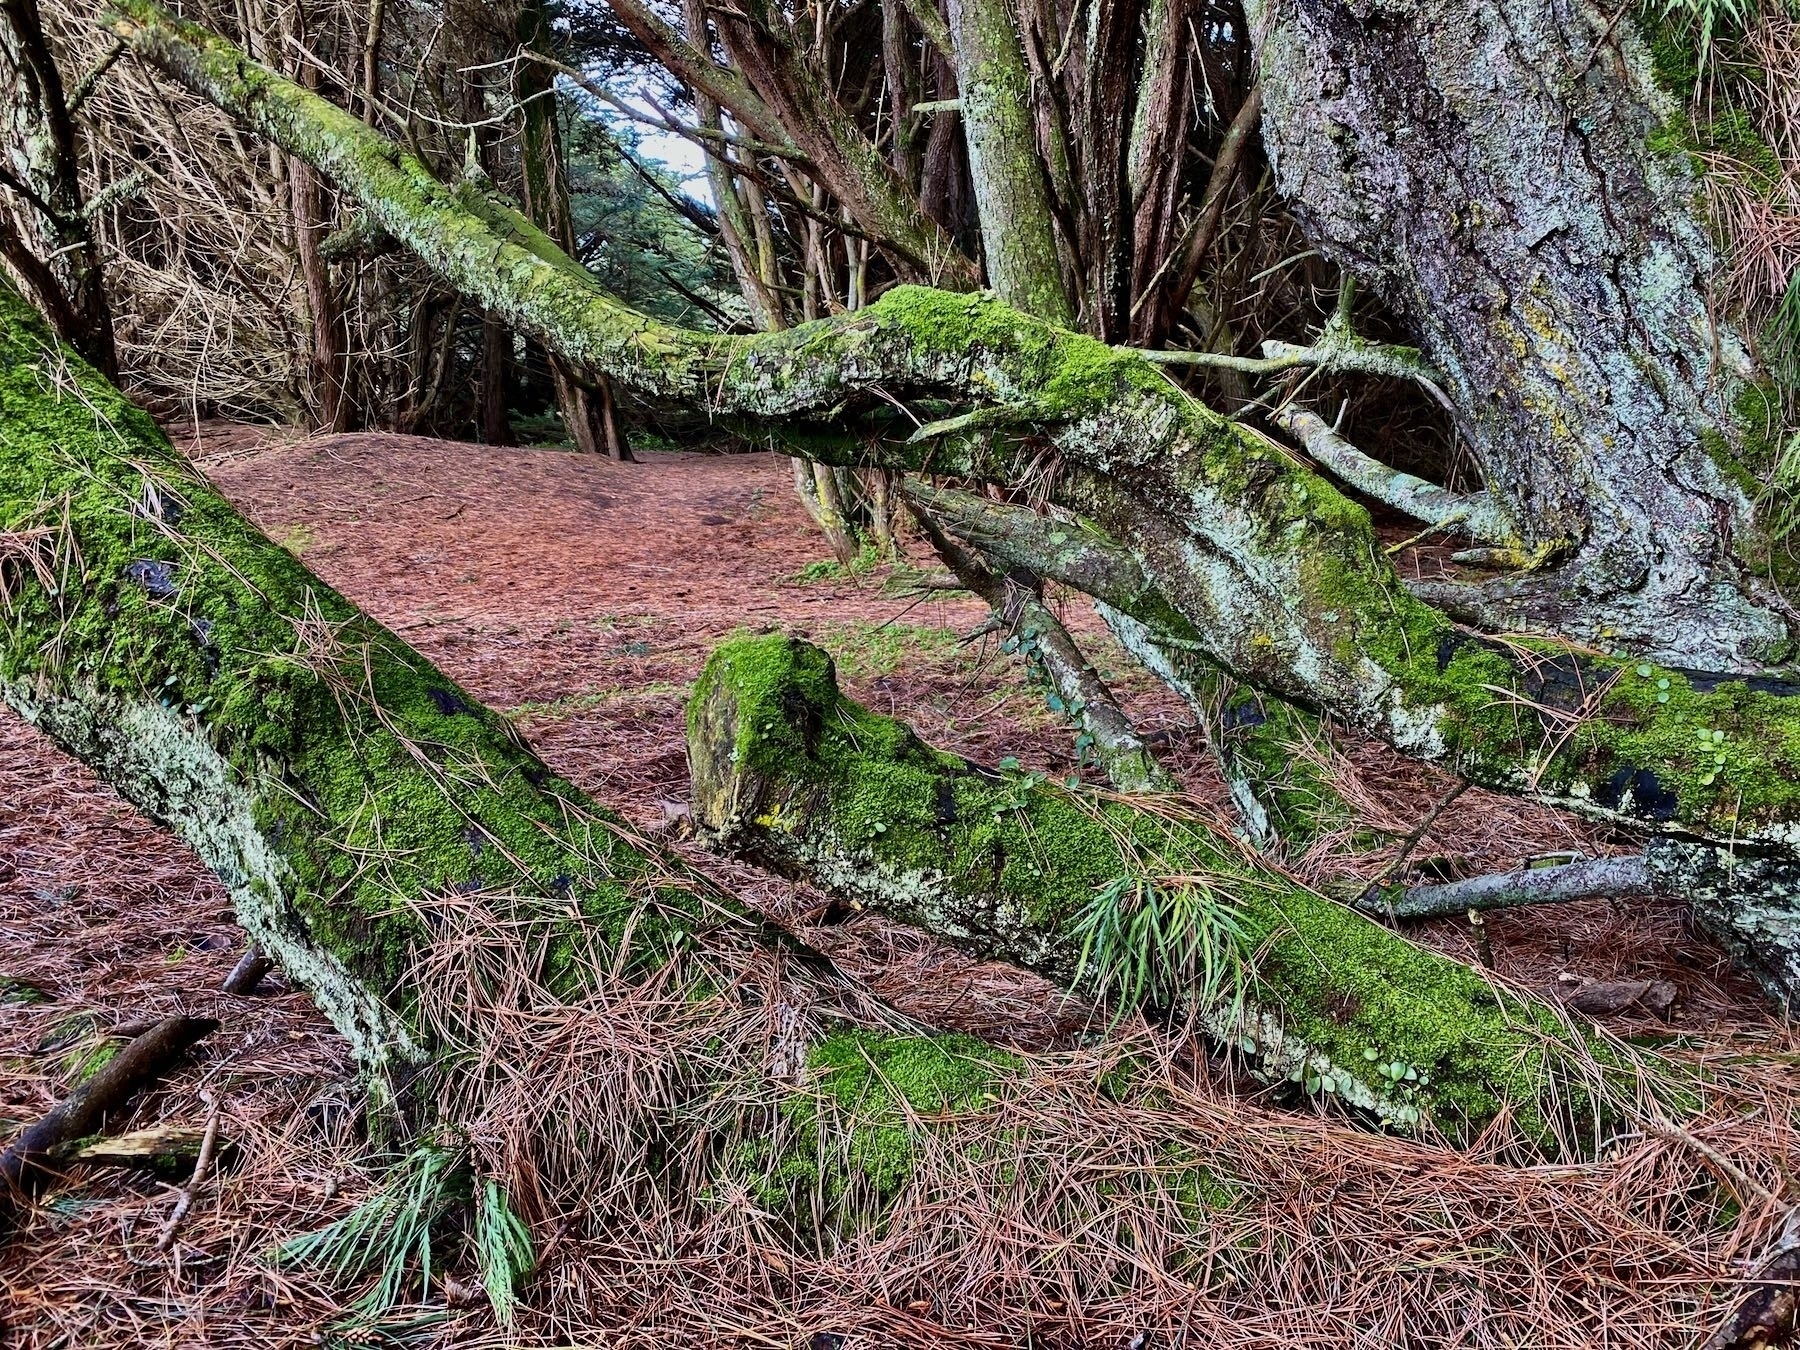 Mossy tree branches. 